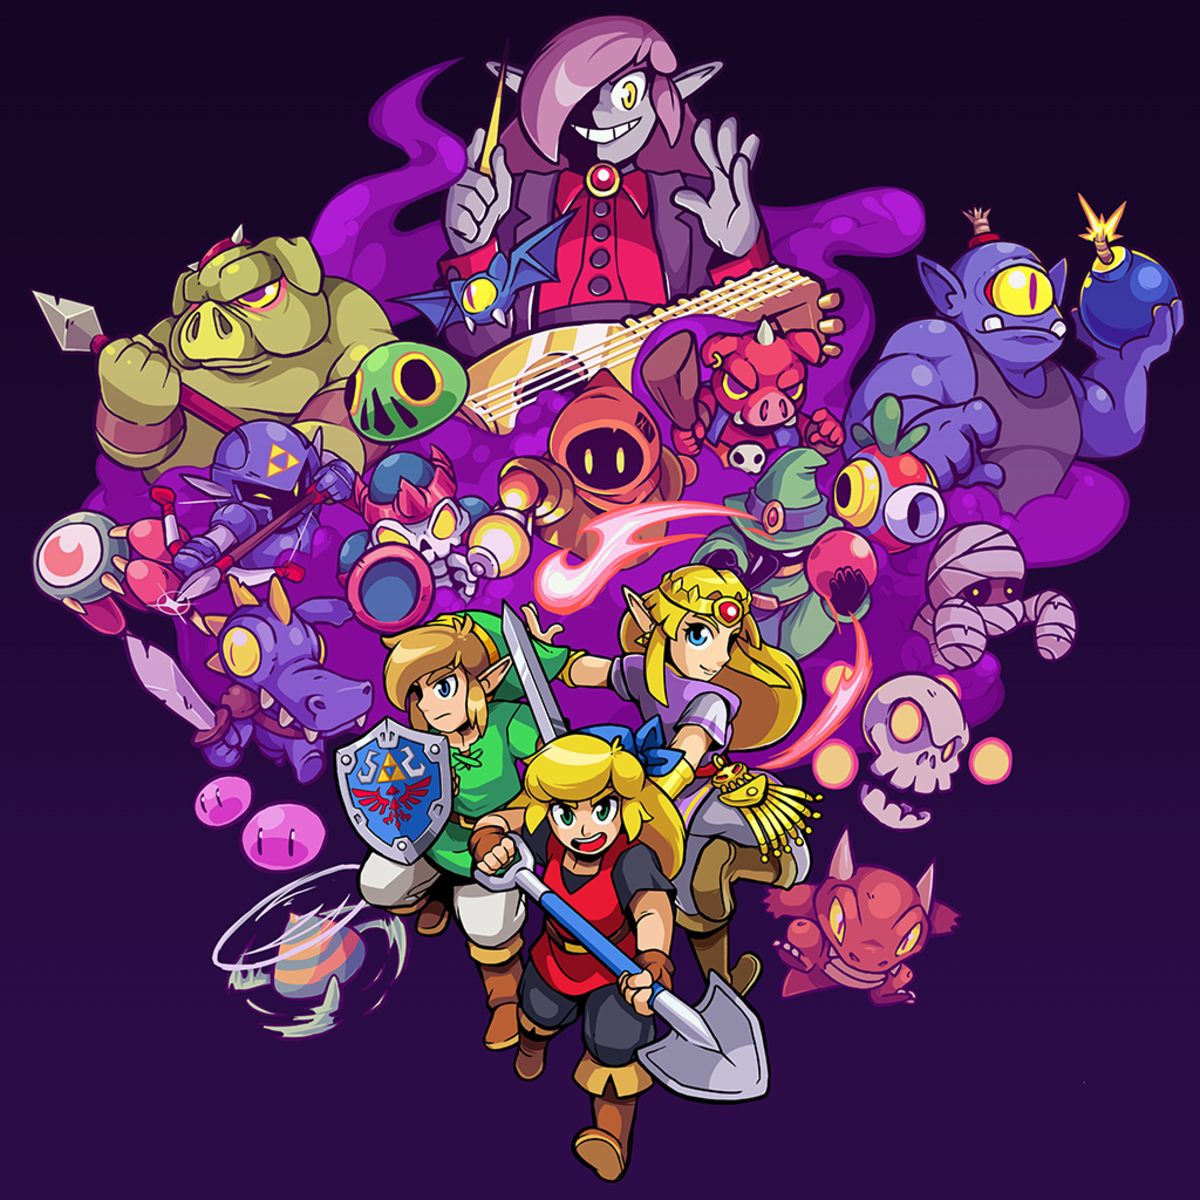 Poster for 'Cadence of Hyrule' with a playable Zelda in a 'Crypt of the NecroDancer' and 'Legend of Zelda' crossover